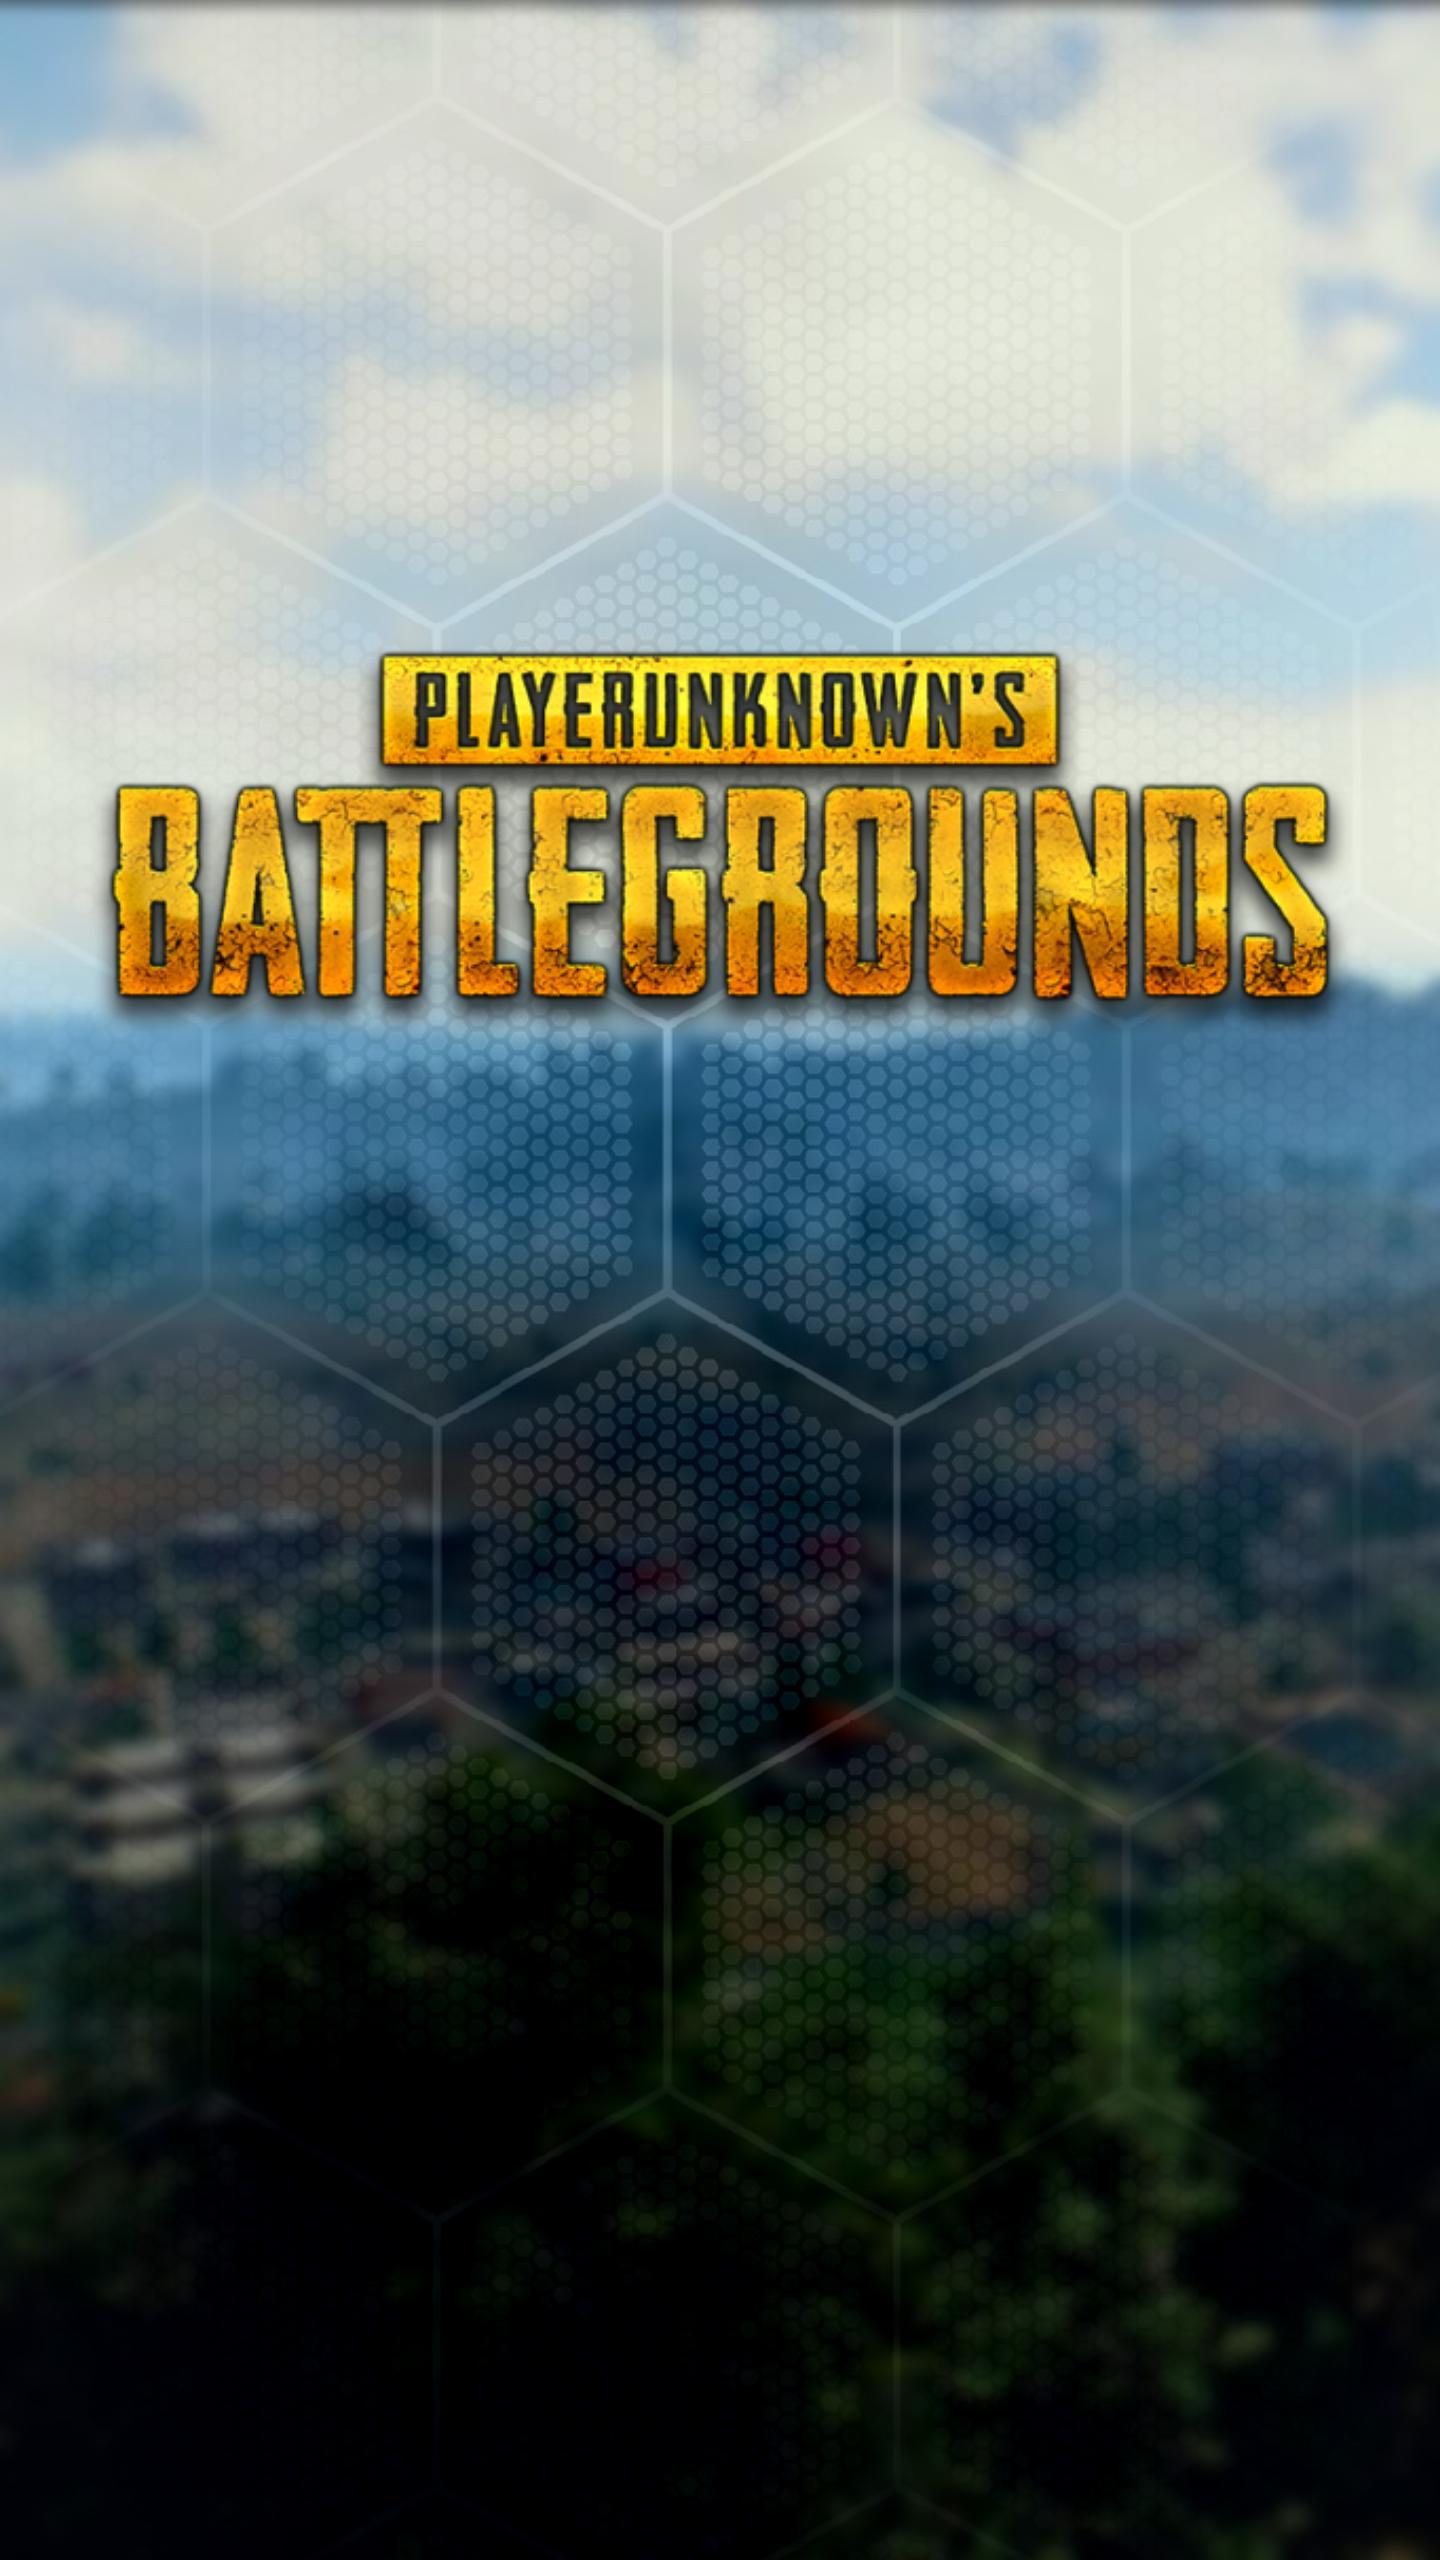 Pubg Iphone Wallpapers Top Free Pubg Iphone Backgrounds Wallpaperaccess